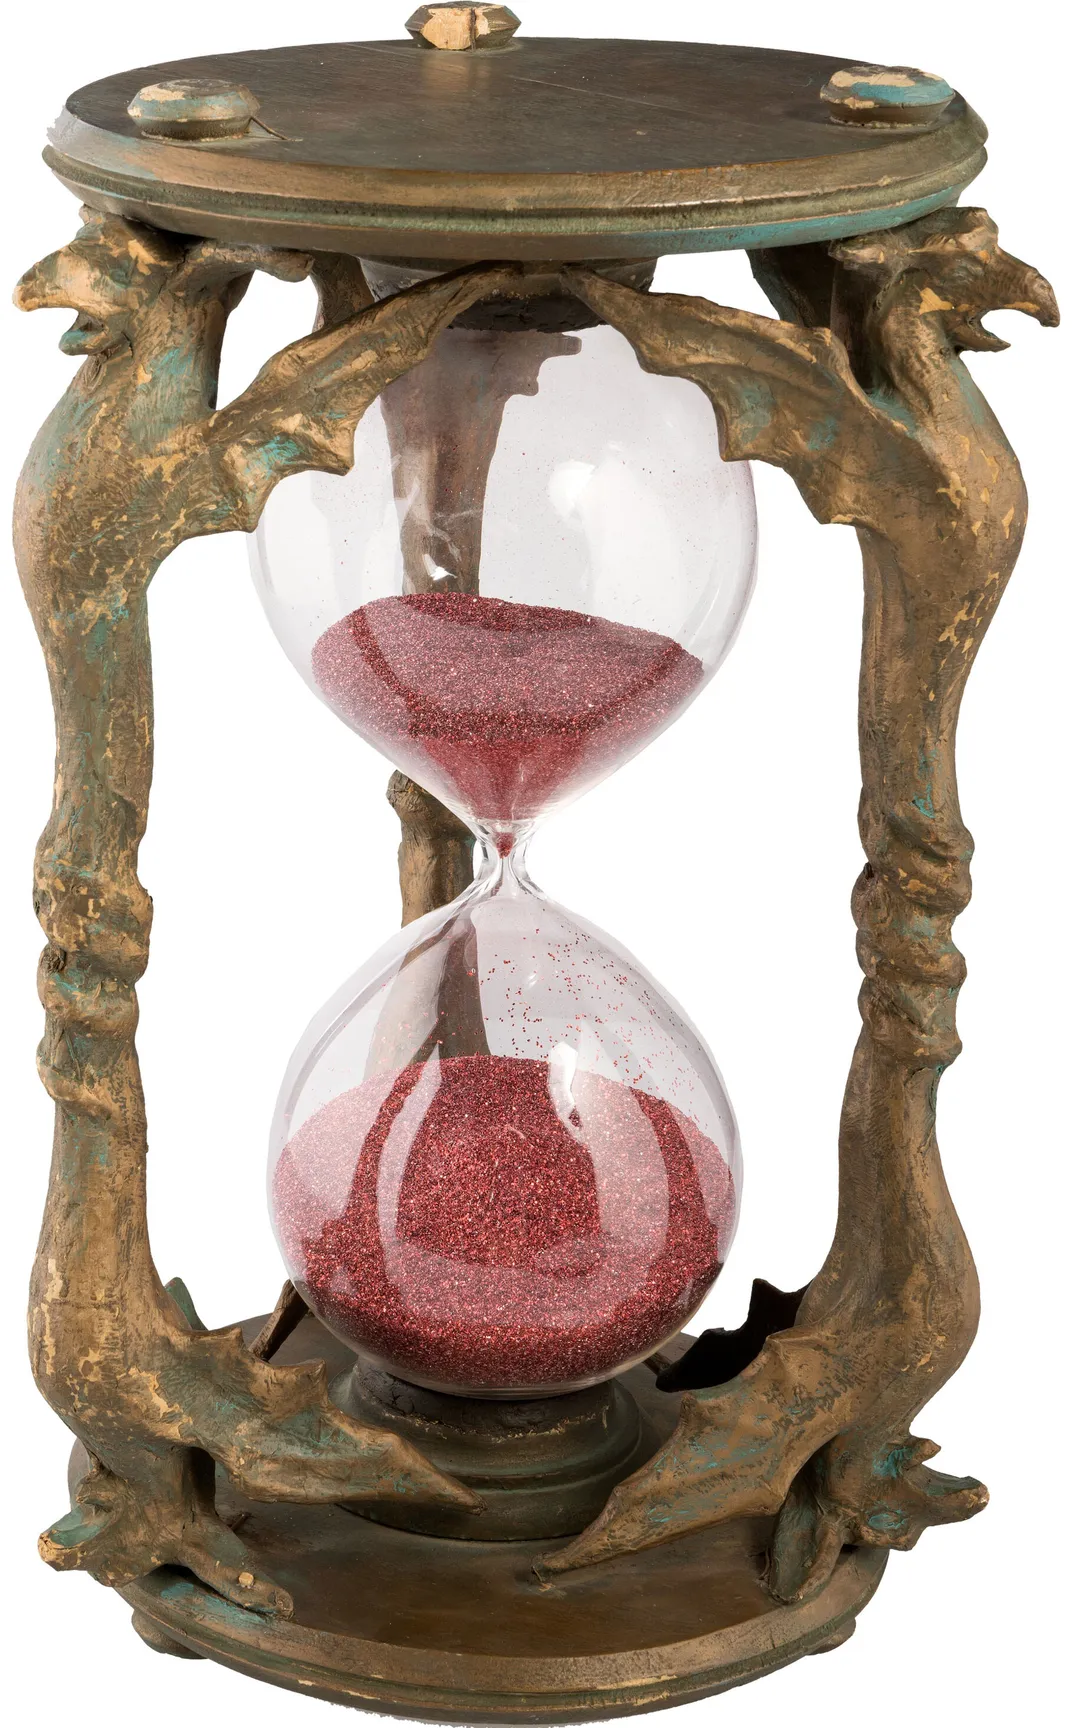 The wicked witch's hourglass